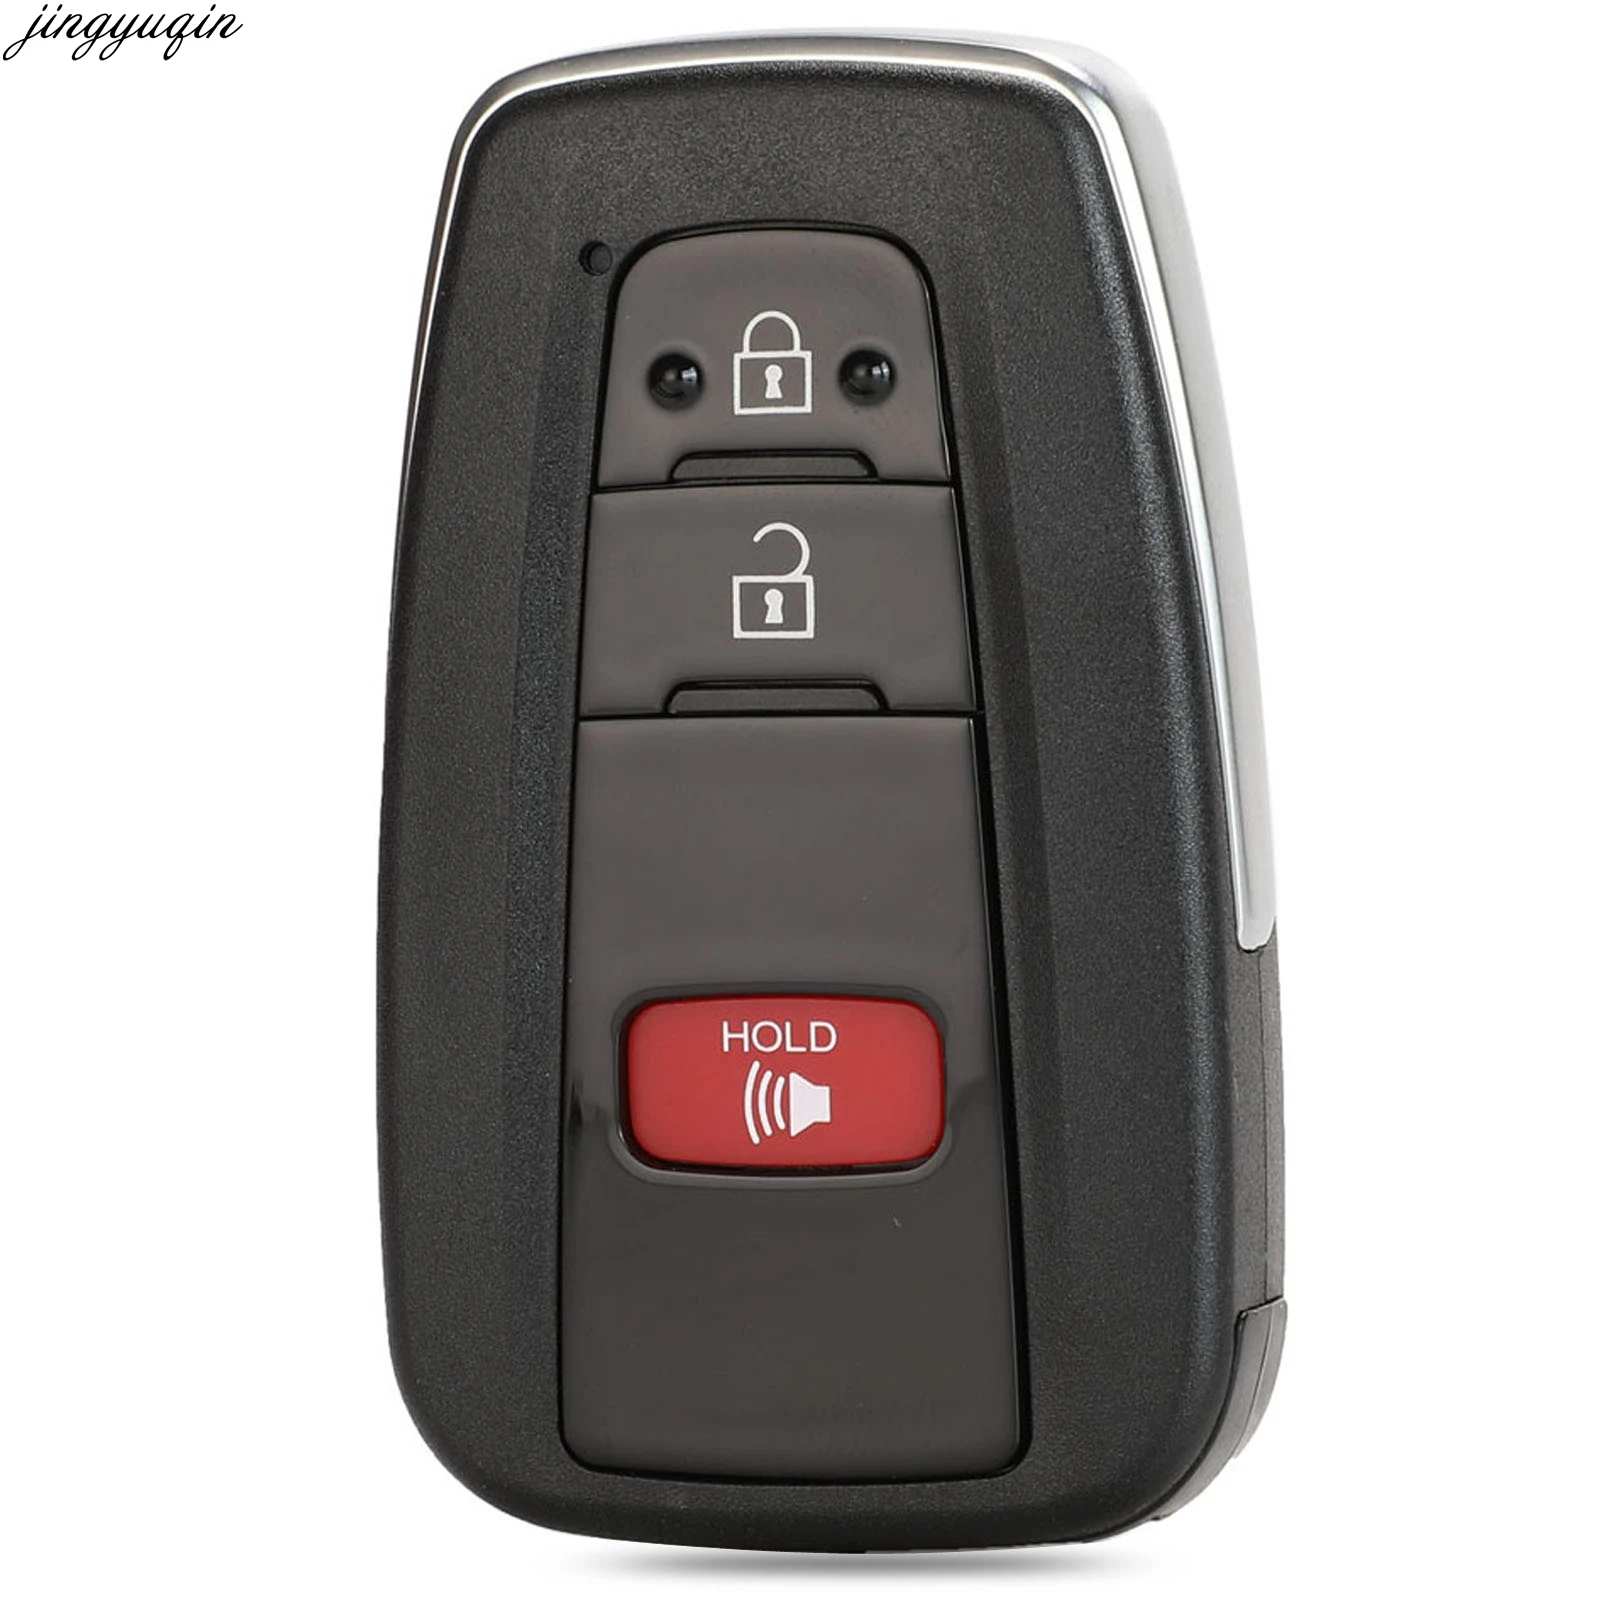 

Jingyuqin 5pcs Remote Car Key Case Shell Suit For Toyota Camry RAV4 Corolla C-HR 2019 2+1 Buttons Smart Key Fob Cover Styling